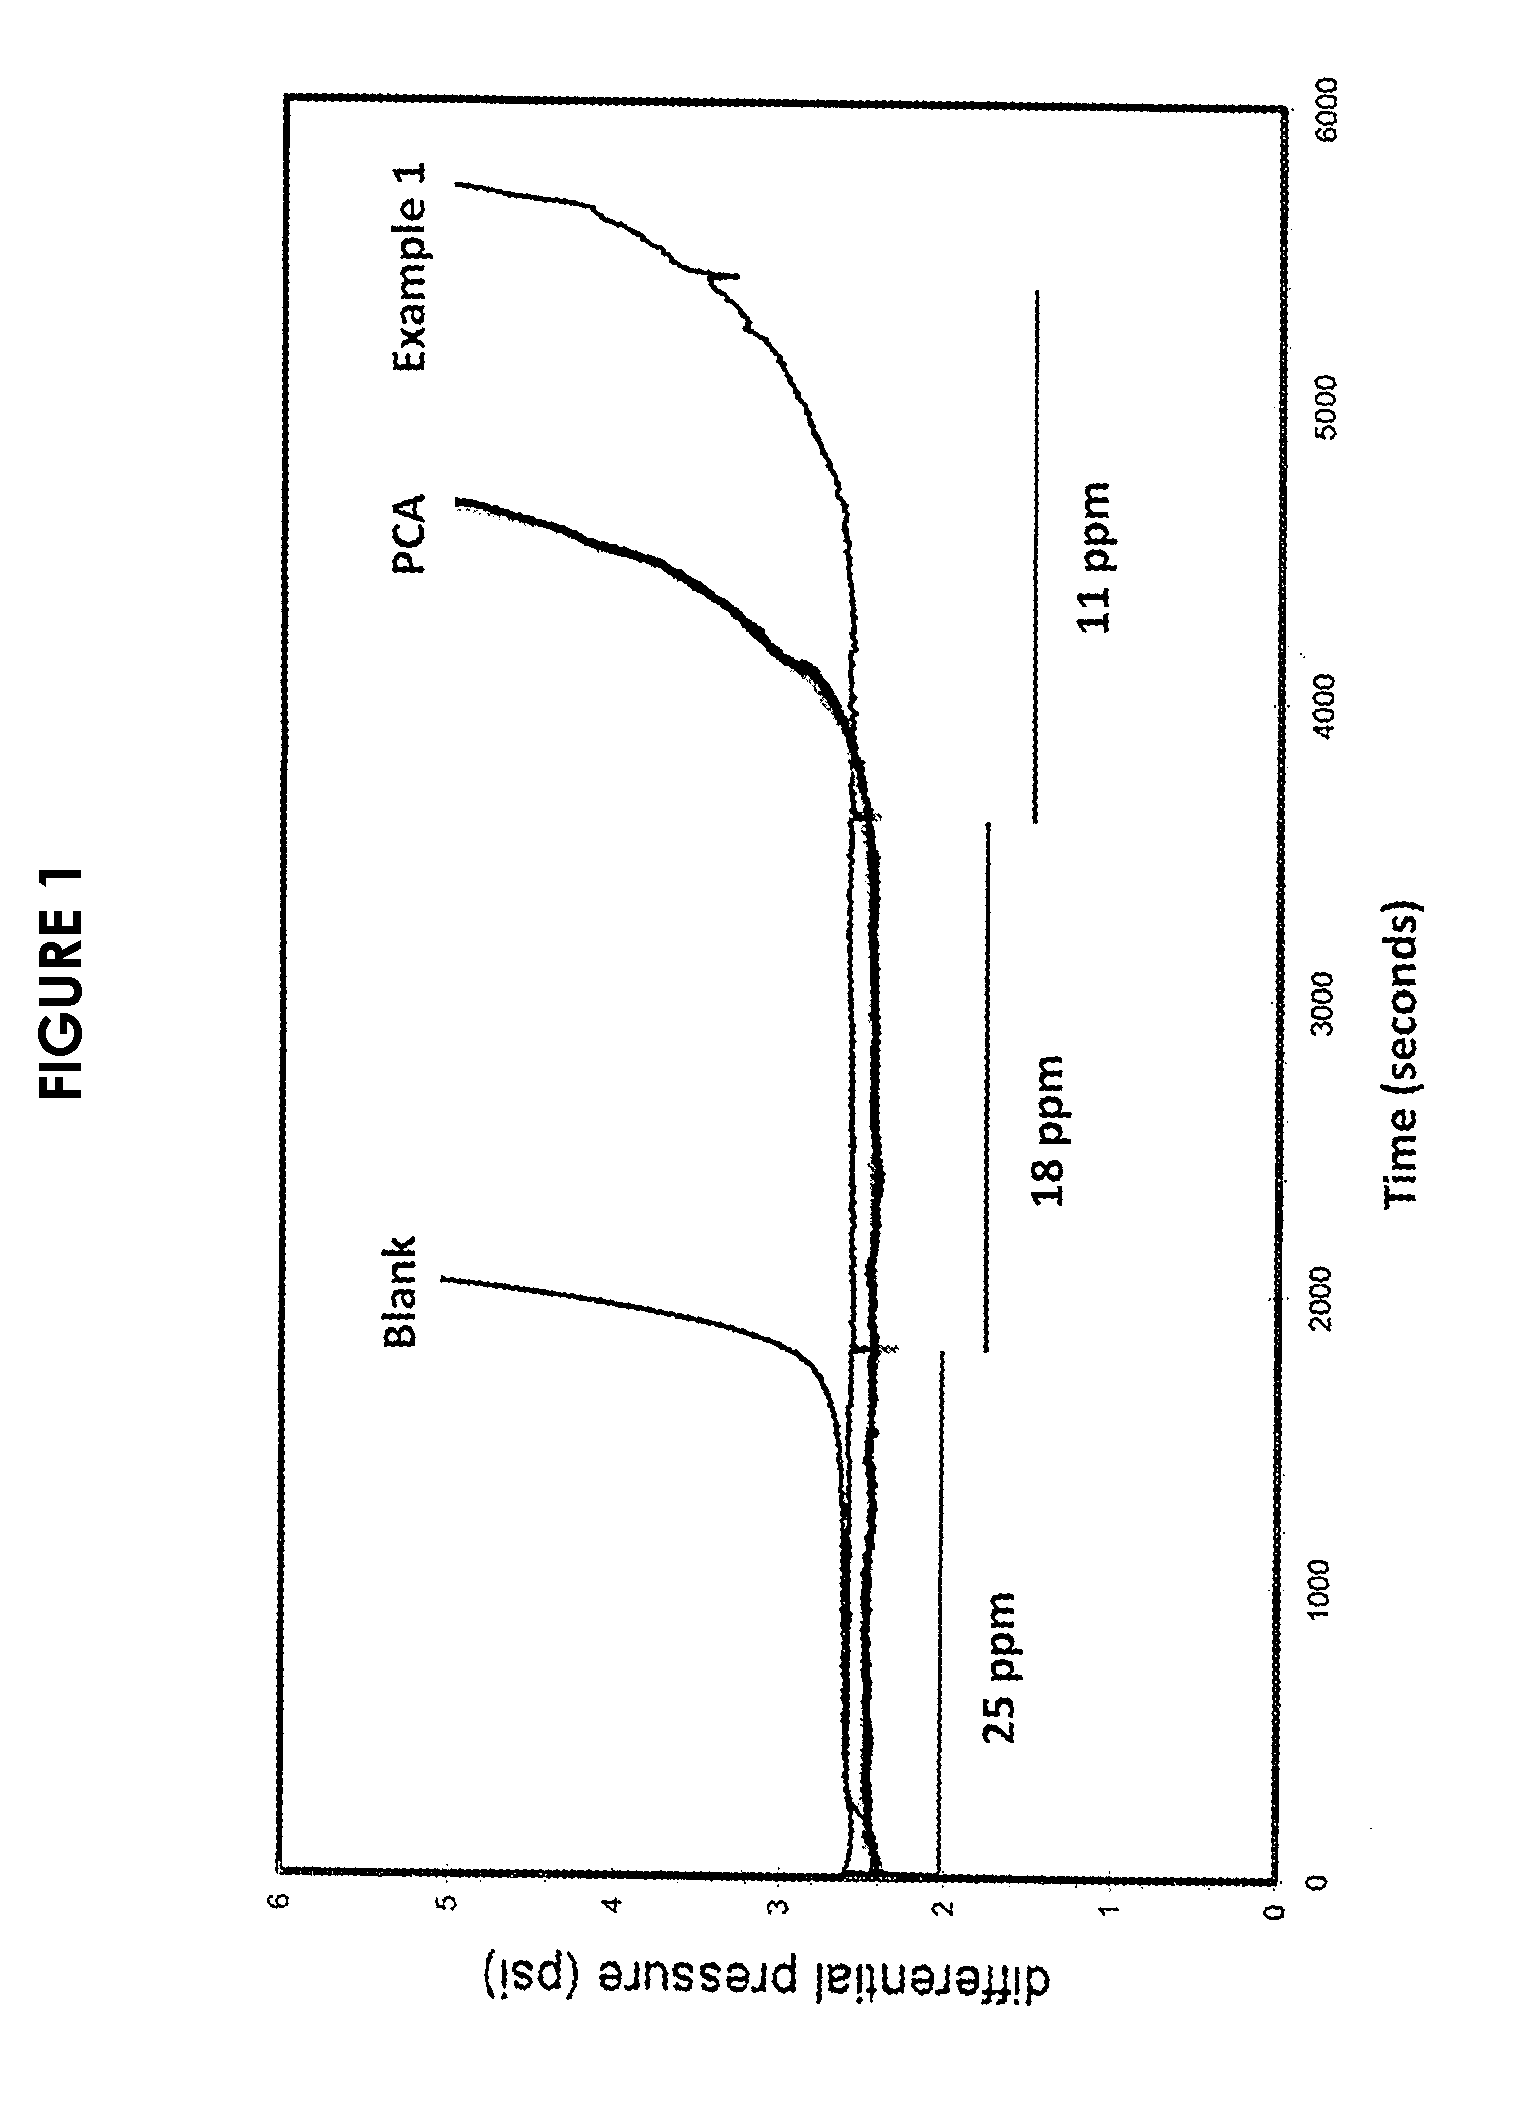 Traceable polymeric scale inhibitors and methods of using such scale inhibitors